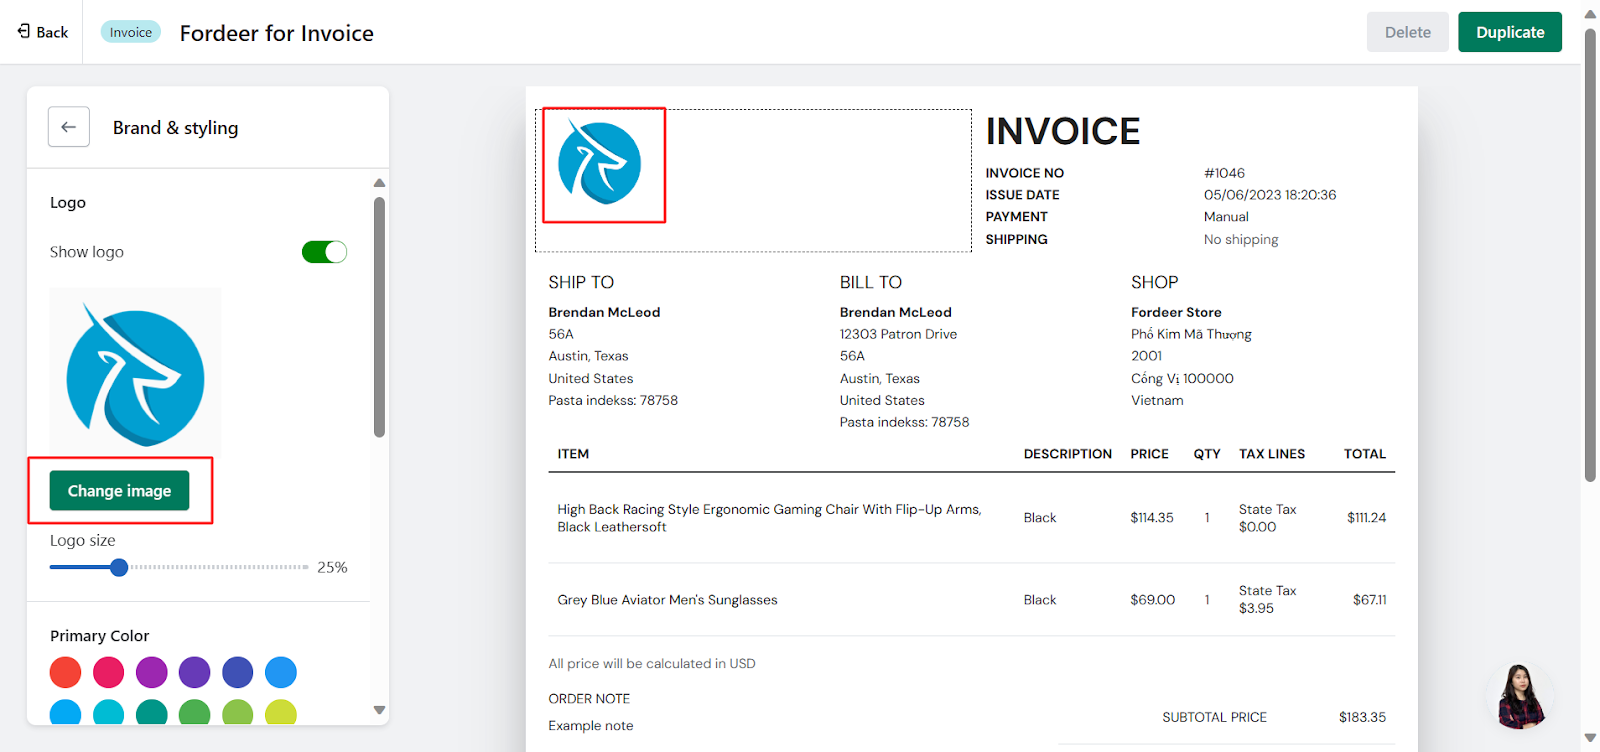 Customize your unique invoice templates with “Branding &amp; styling”